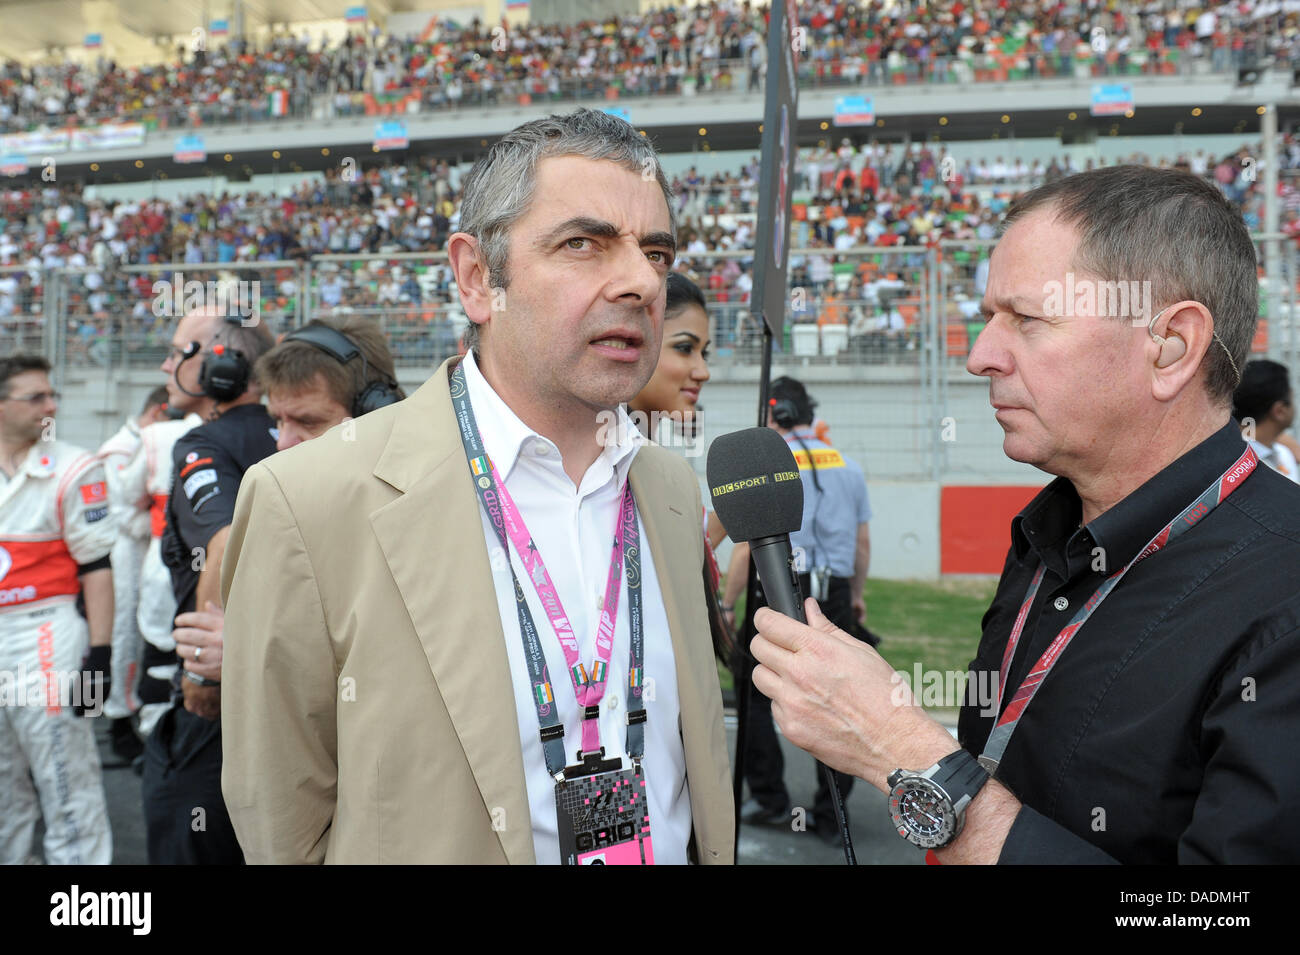 British comedian Rowan Atkinson ets interviewed by former British Formula One driver Martin Brundle in the grid just before the start of the race at the Buddh International Circuit, Greater Noida, India, 30 October 2011. The first-ever Formula One Grand Prix of India will take place on 30 October 2011. Photo: David Ebener dpa Stock Photo